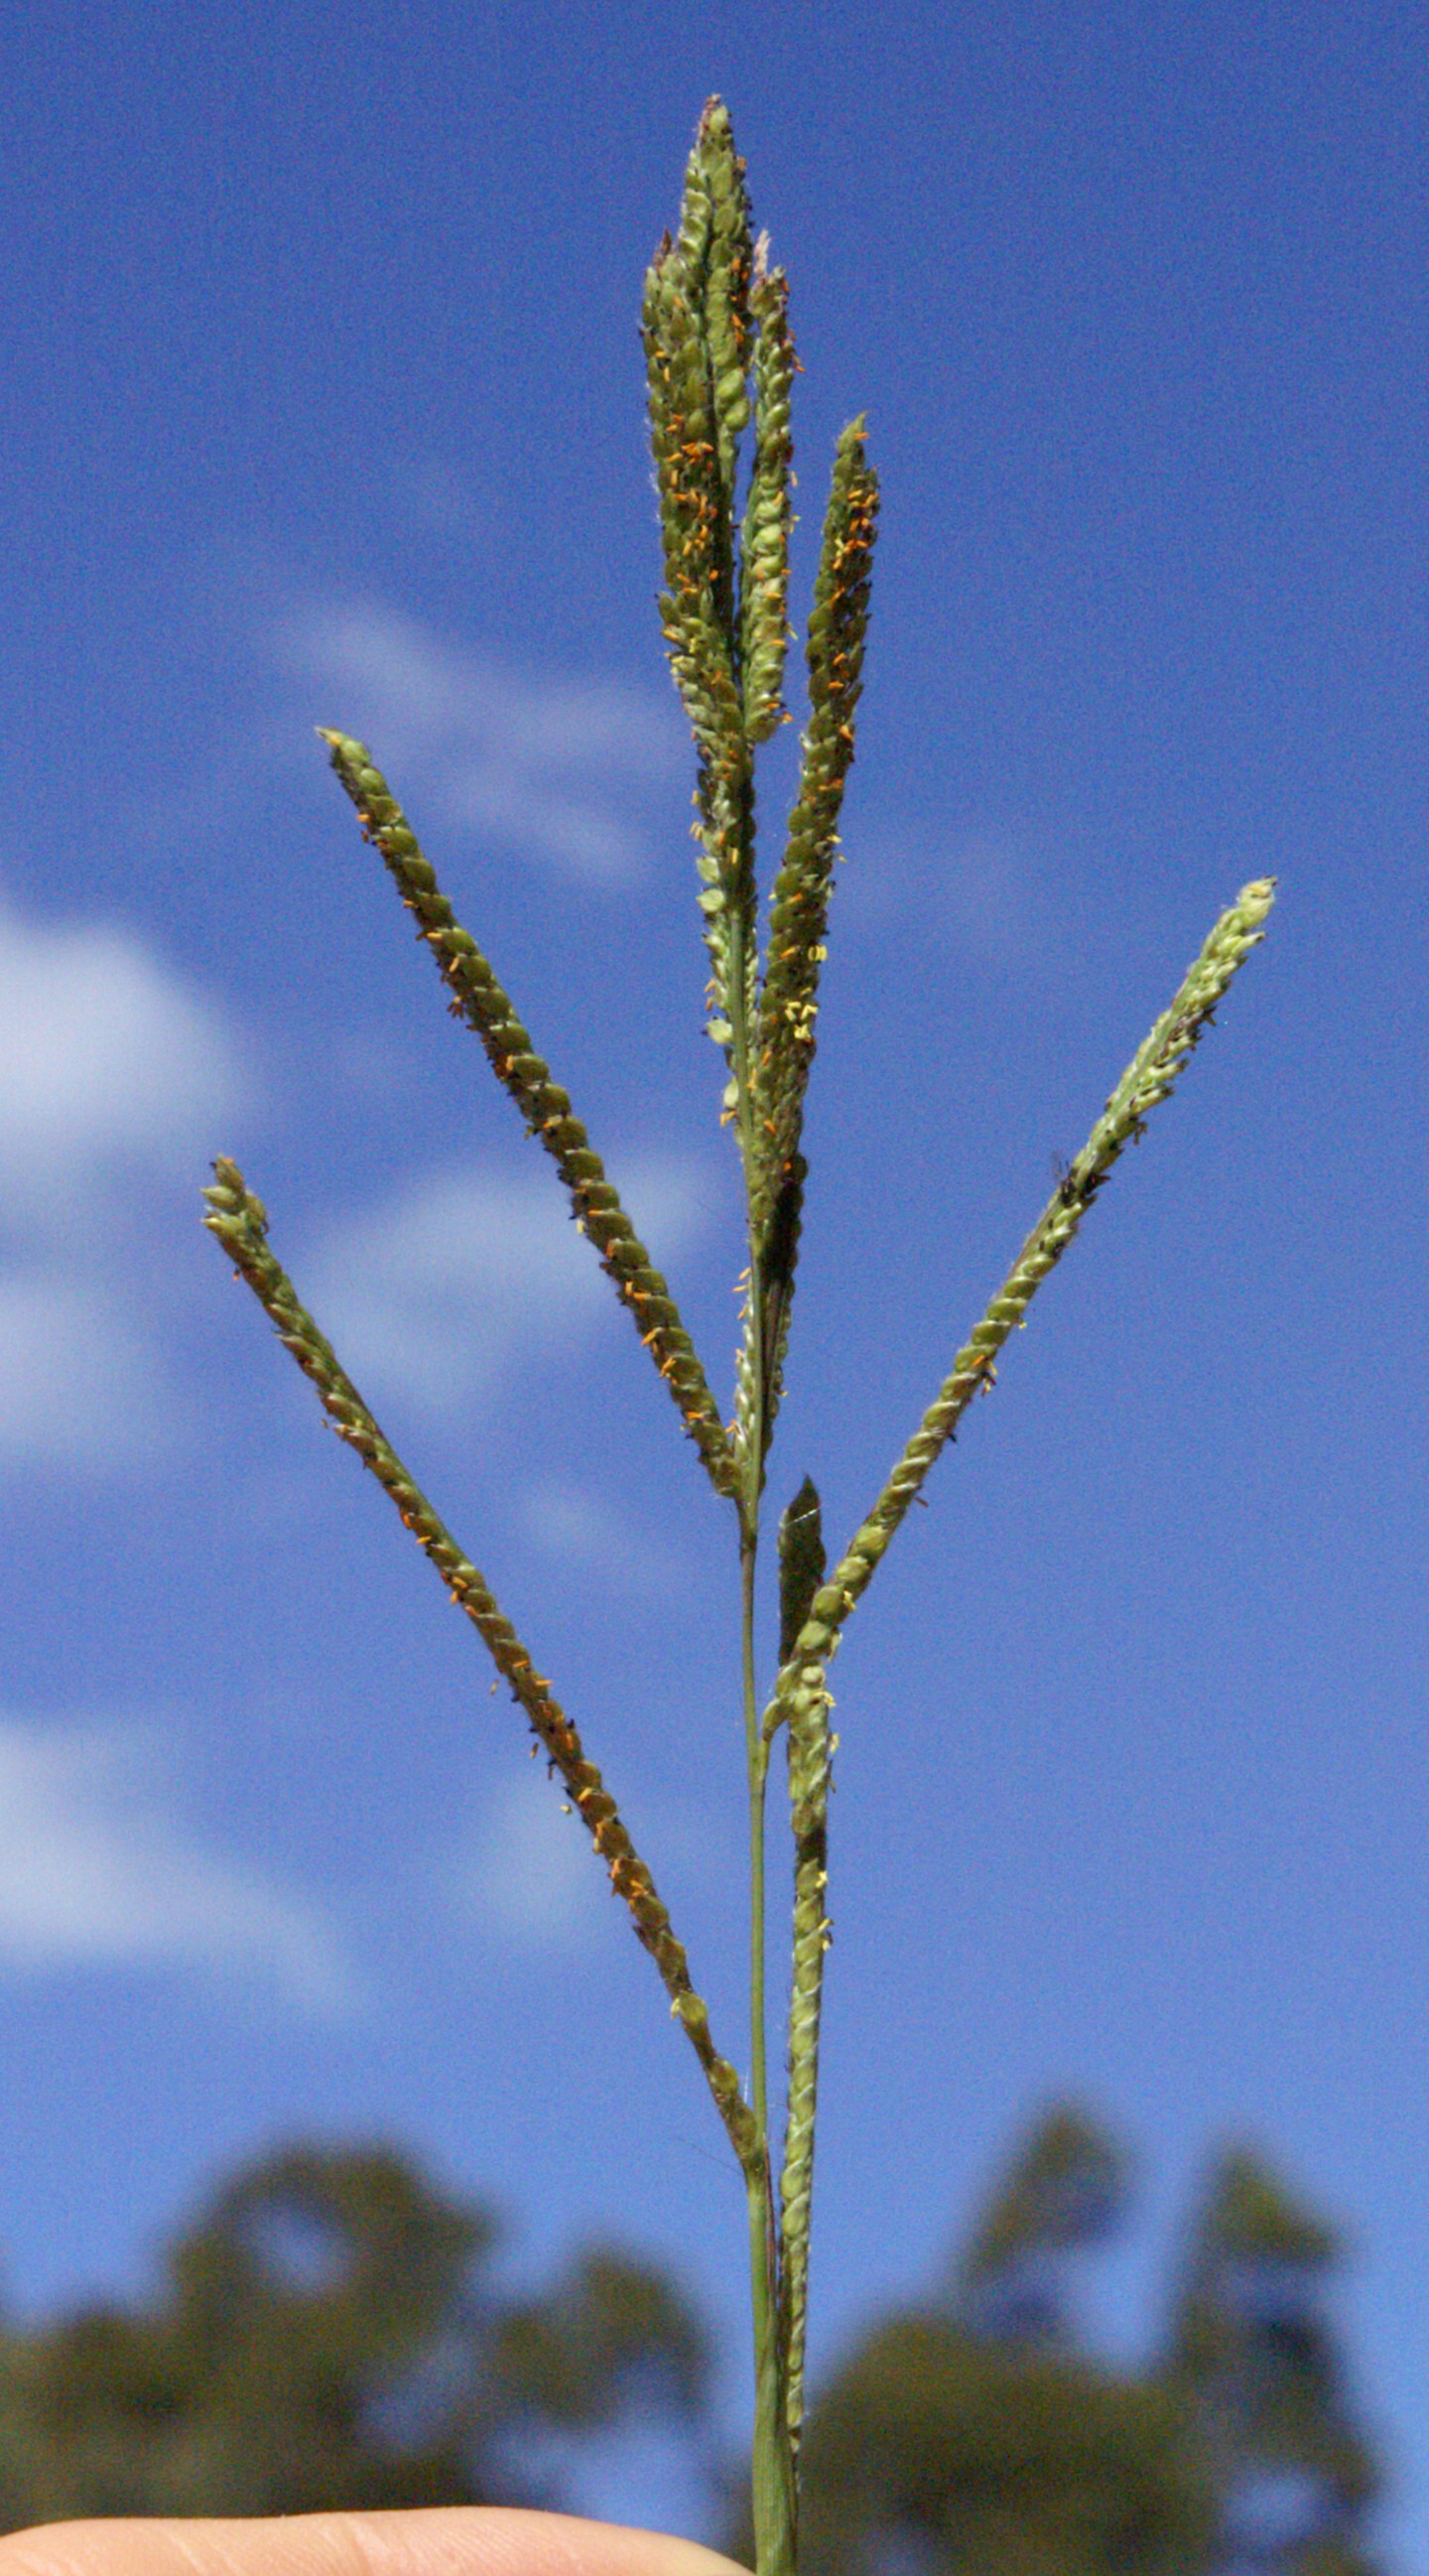 Close up of alternating spikelets and a clump of terminal spikelets.